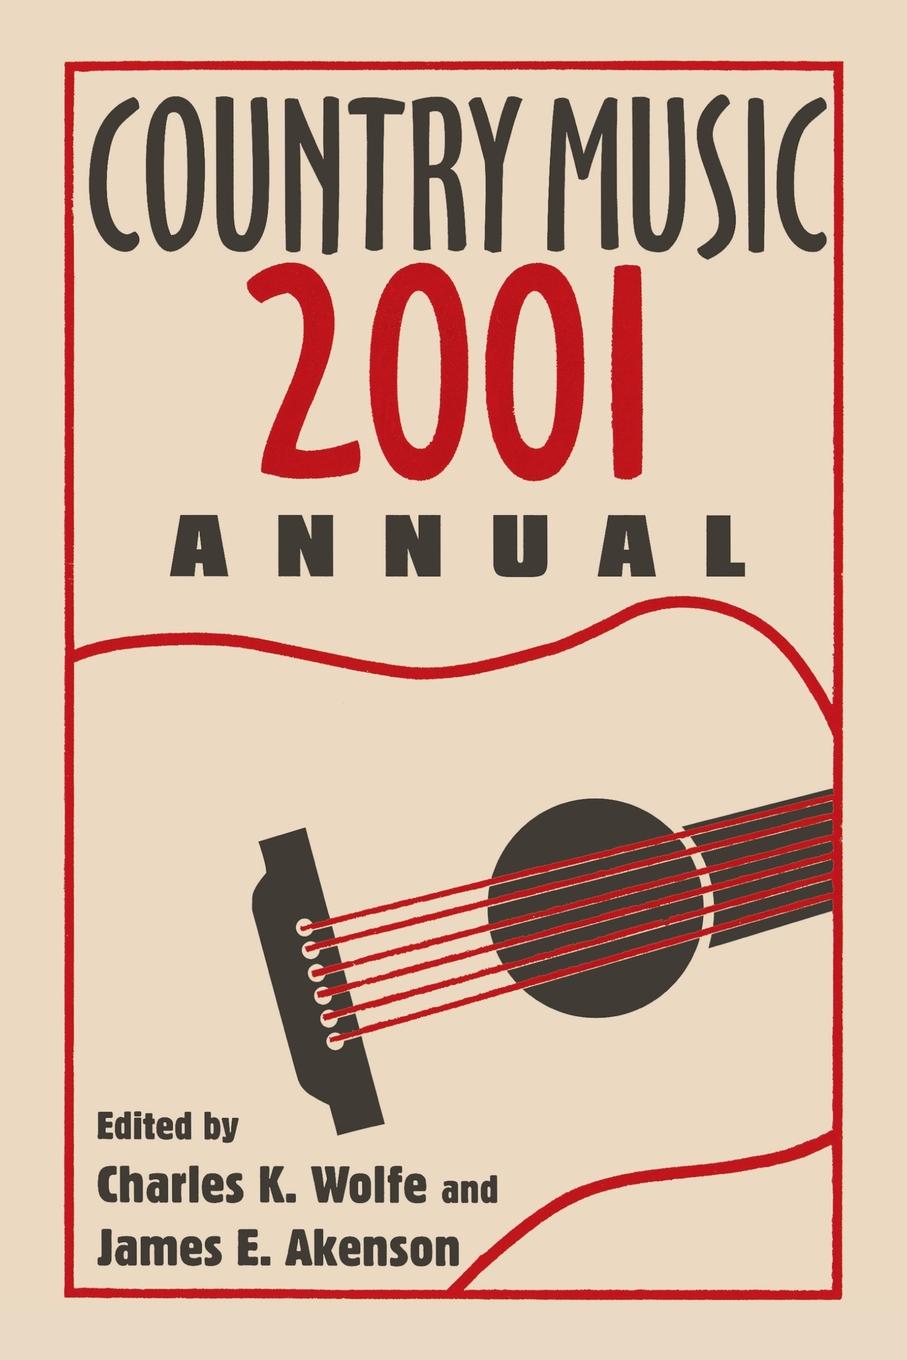 Country Music Annual 2001 - Charles K. Wolfe, James E. Akenson